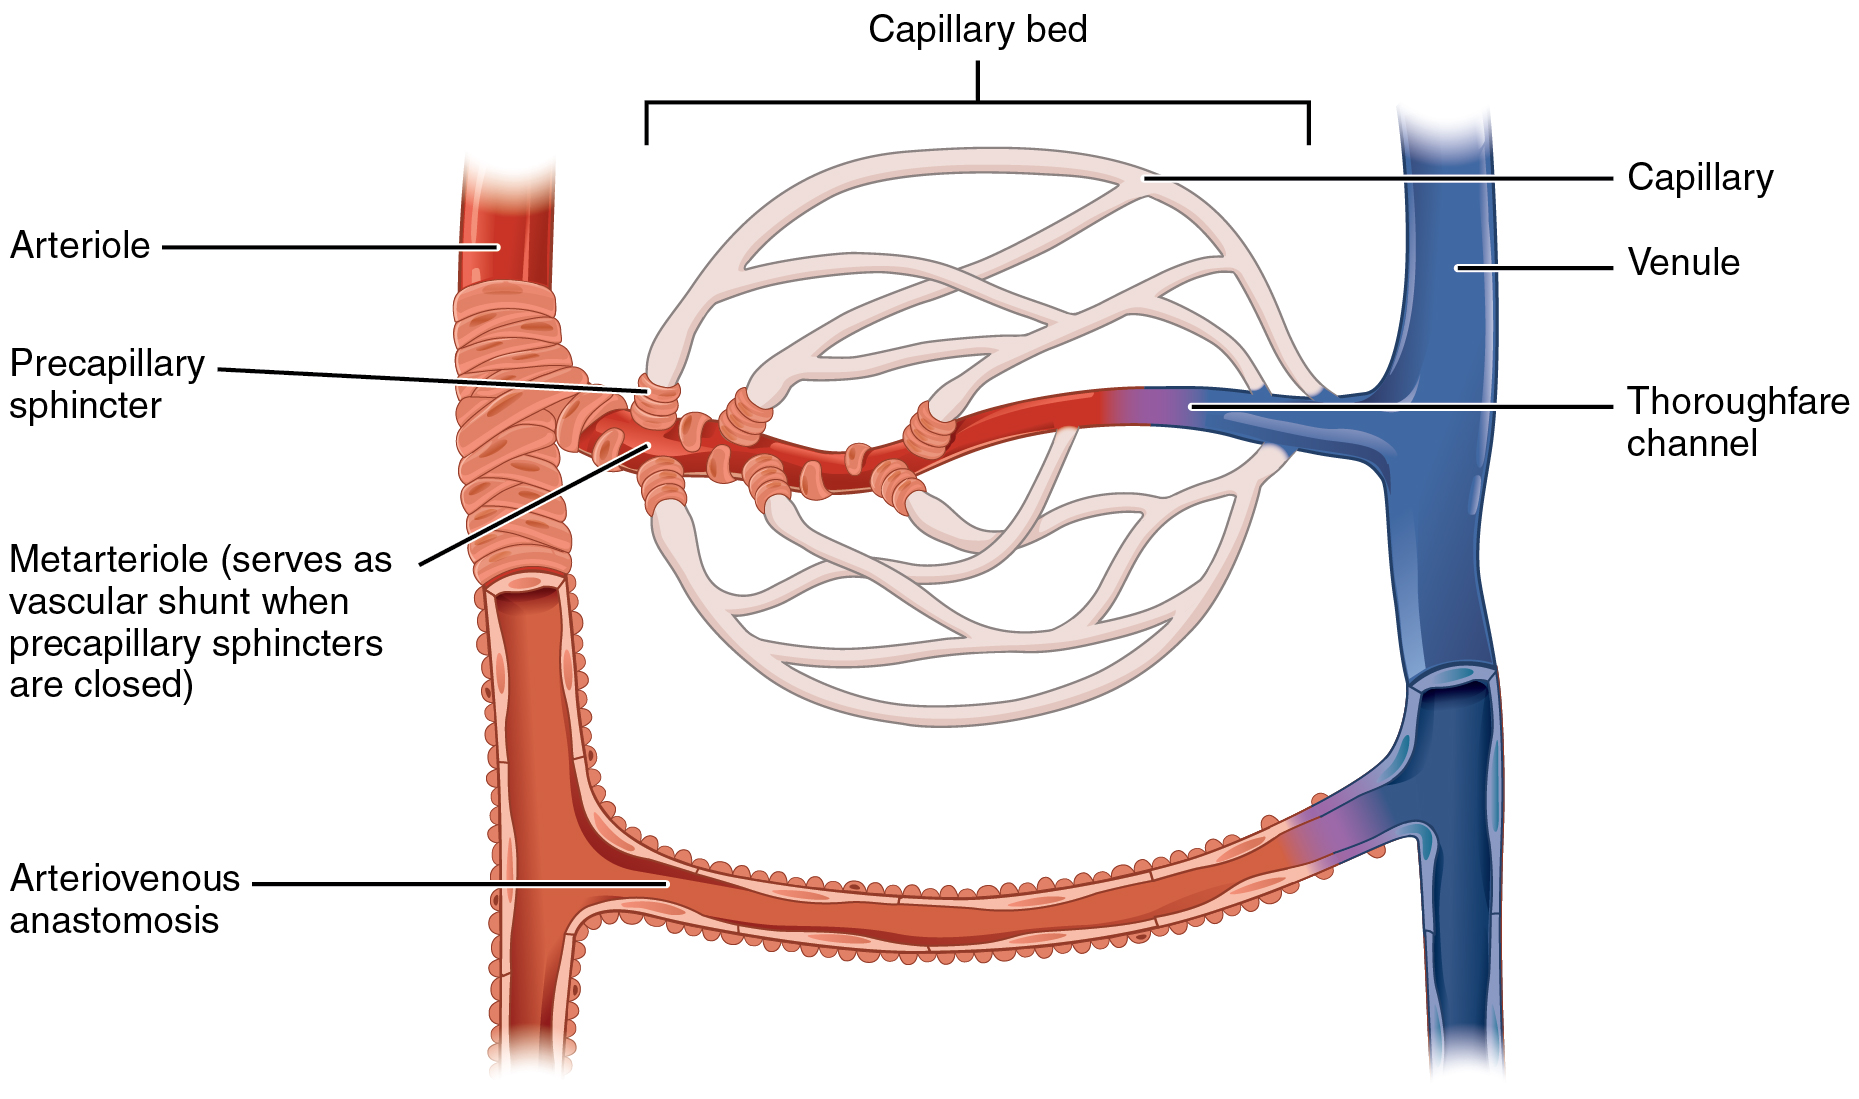 Blood vessels forming capillary bed